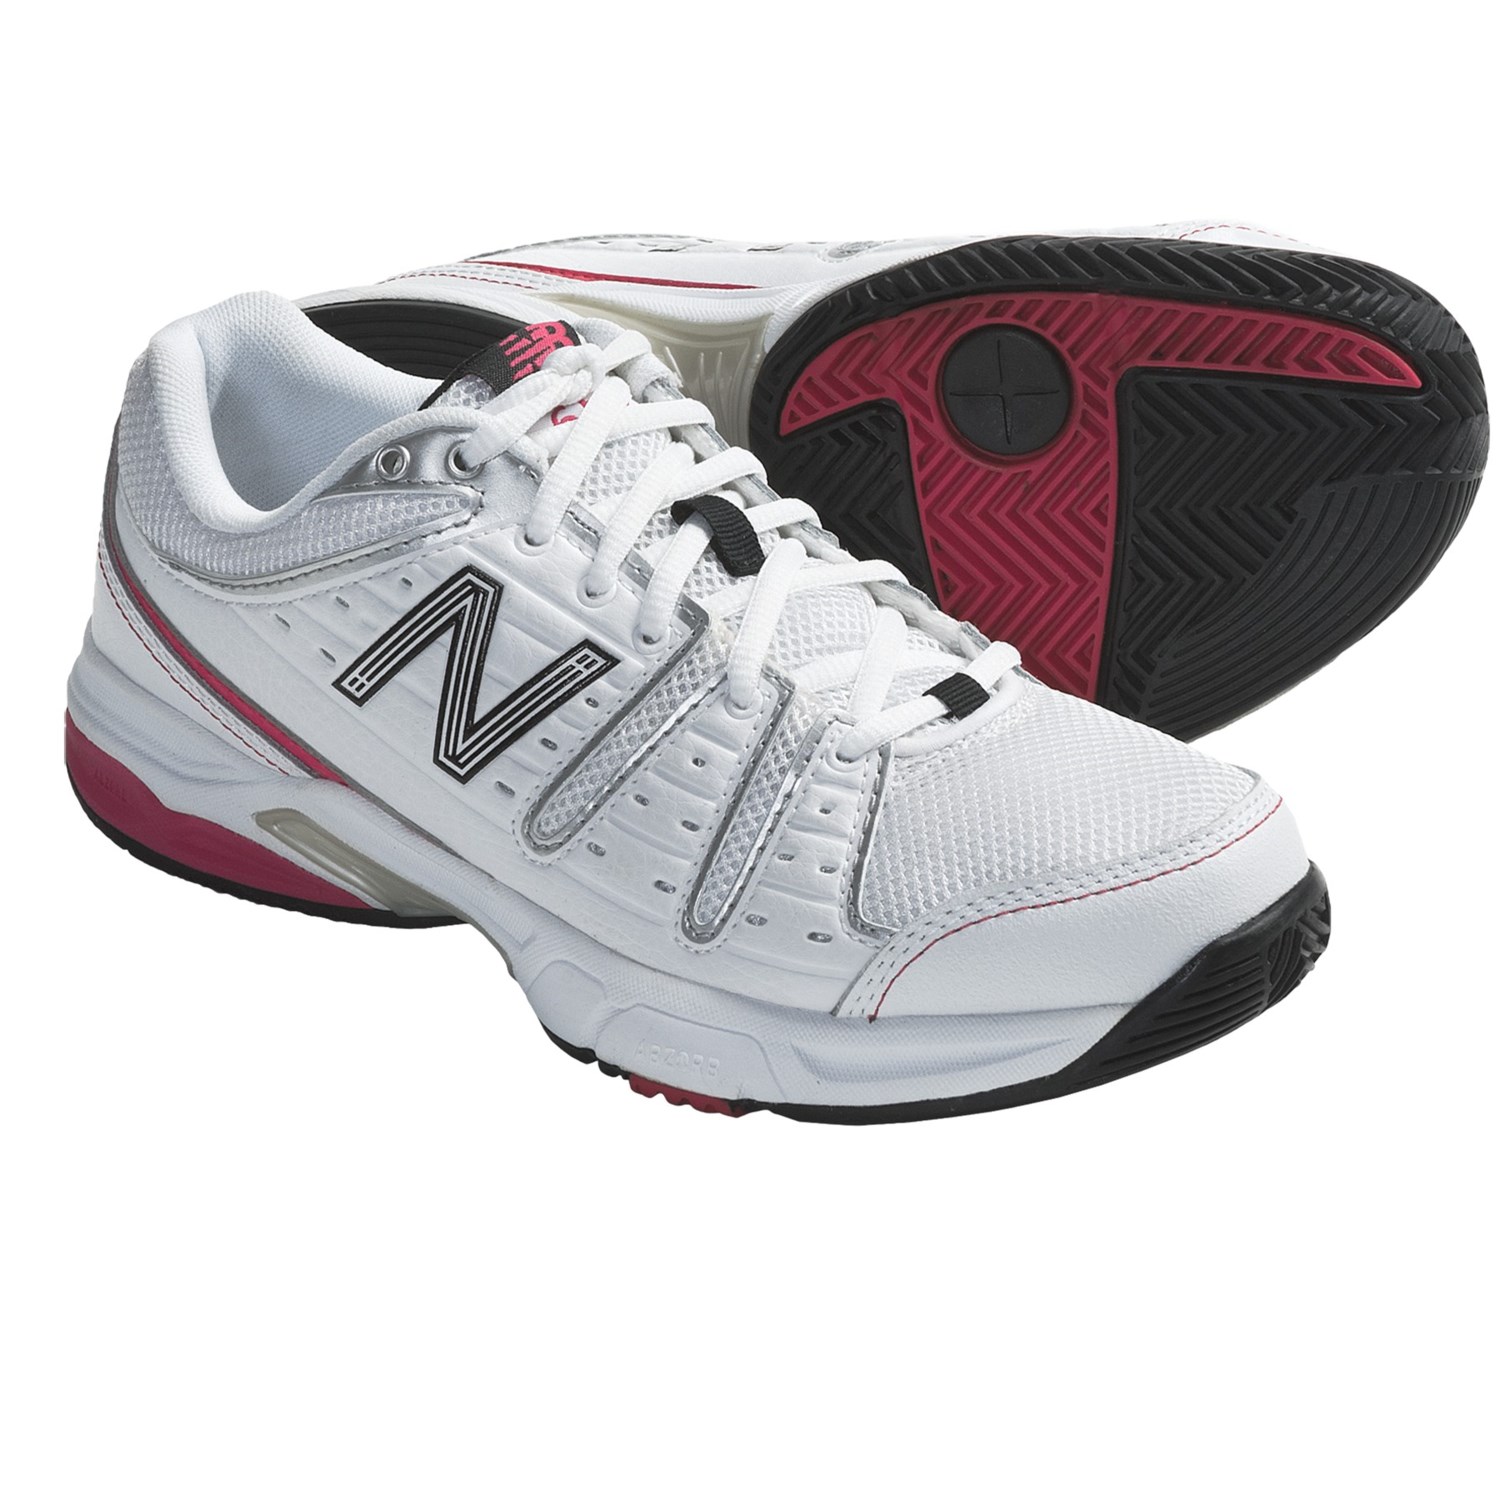 New Balance WC656 Tennis Shoes (For Women) - Save 60%